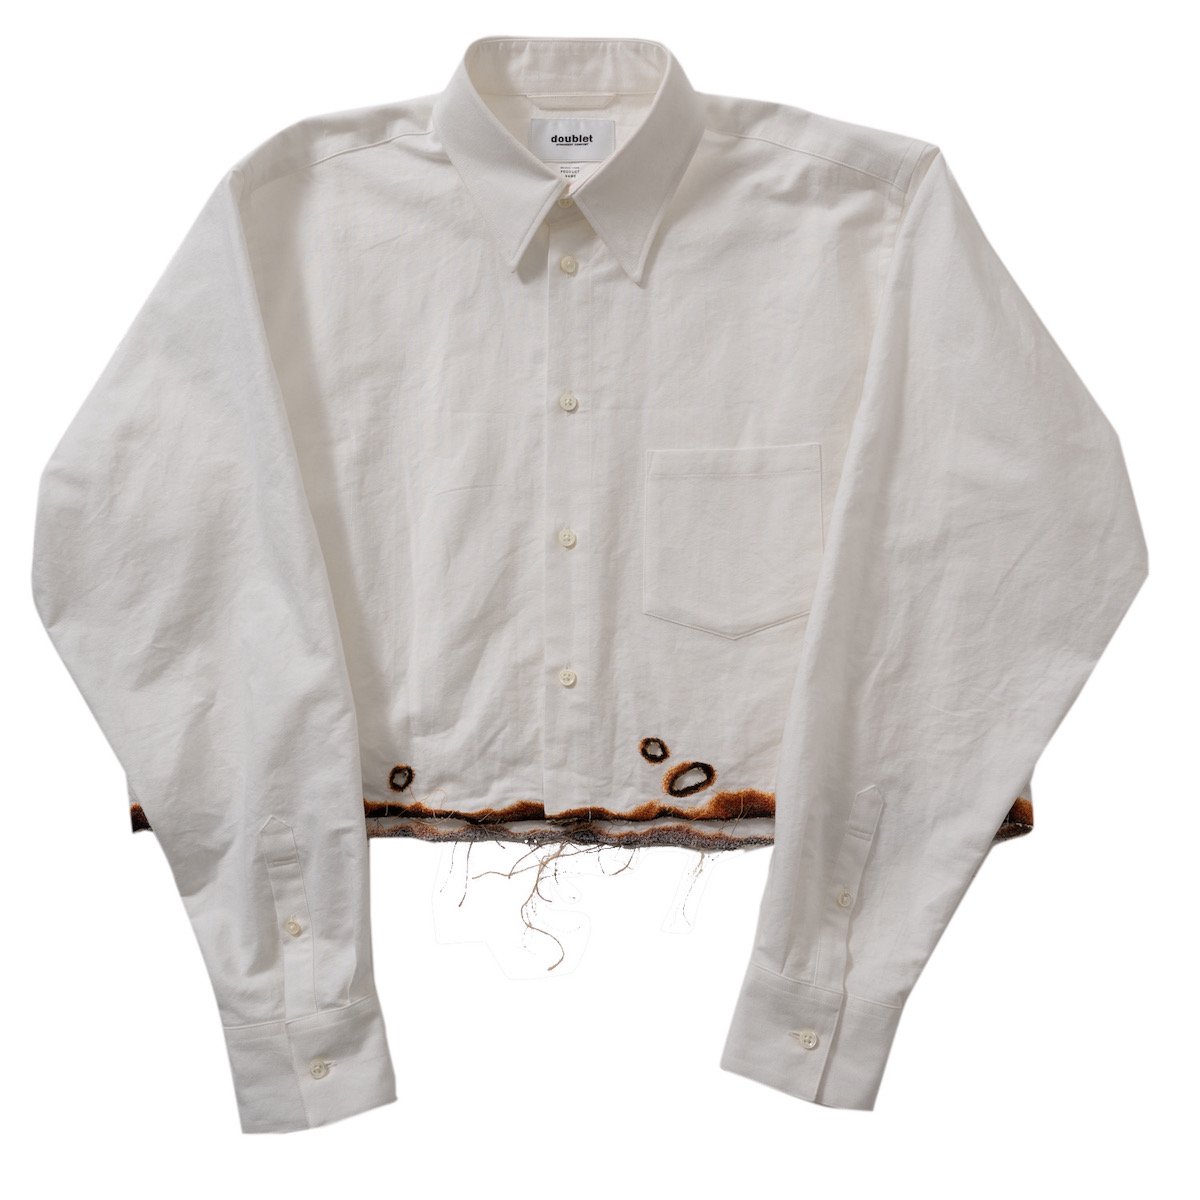 doublet BURNING EMBROIDERY CUTSEW WHITE | birraquepersianas.com.br